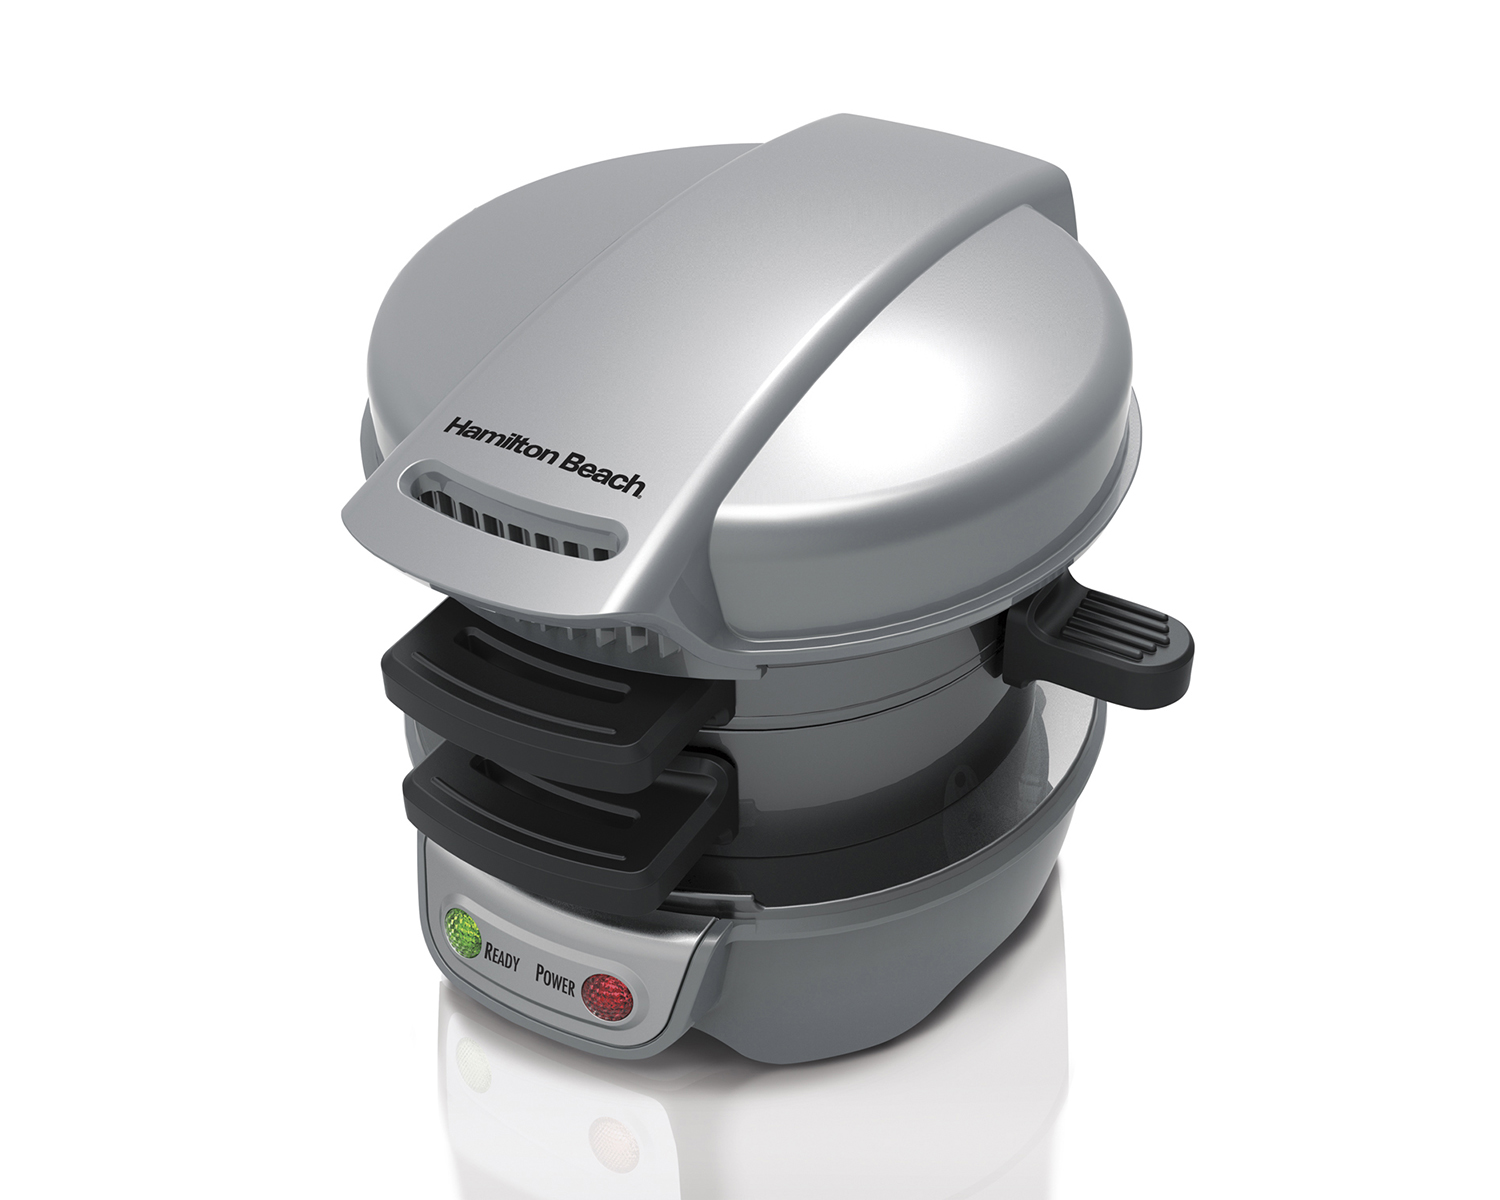 Hamilton Beach Breakfast Sandwich Maker with Egg Cooker Ring, Customize  Ingredients, Perfect for English Muffins, Croissants, Mini Waffles, Perfect